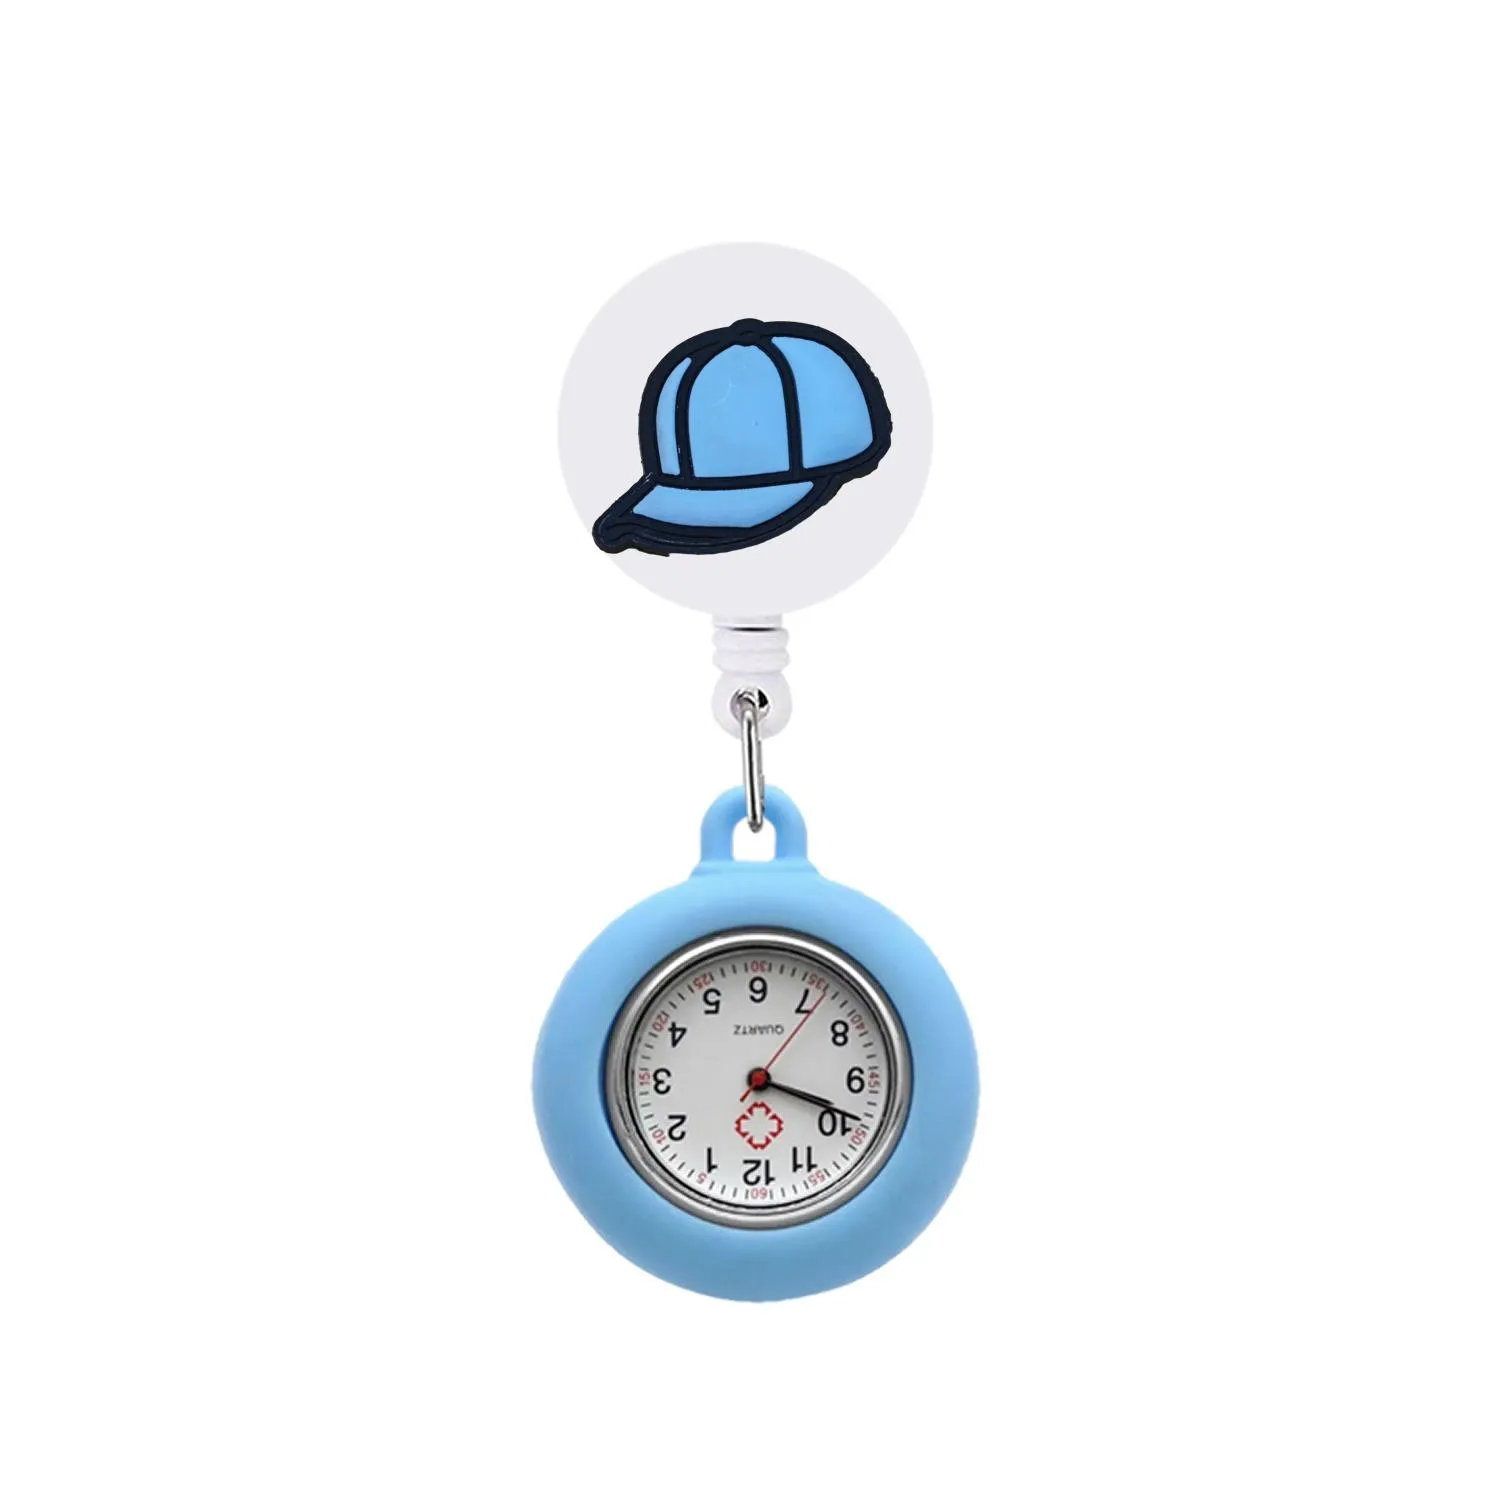 hat clip pocket watches silicone lapel nurse watch with second hand brooch fob for medical workers on easy to read alligator hang clock gift